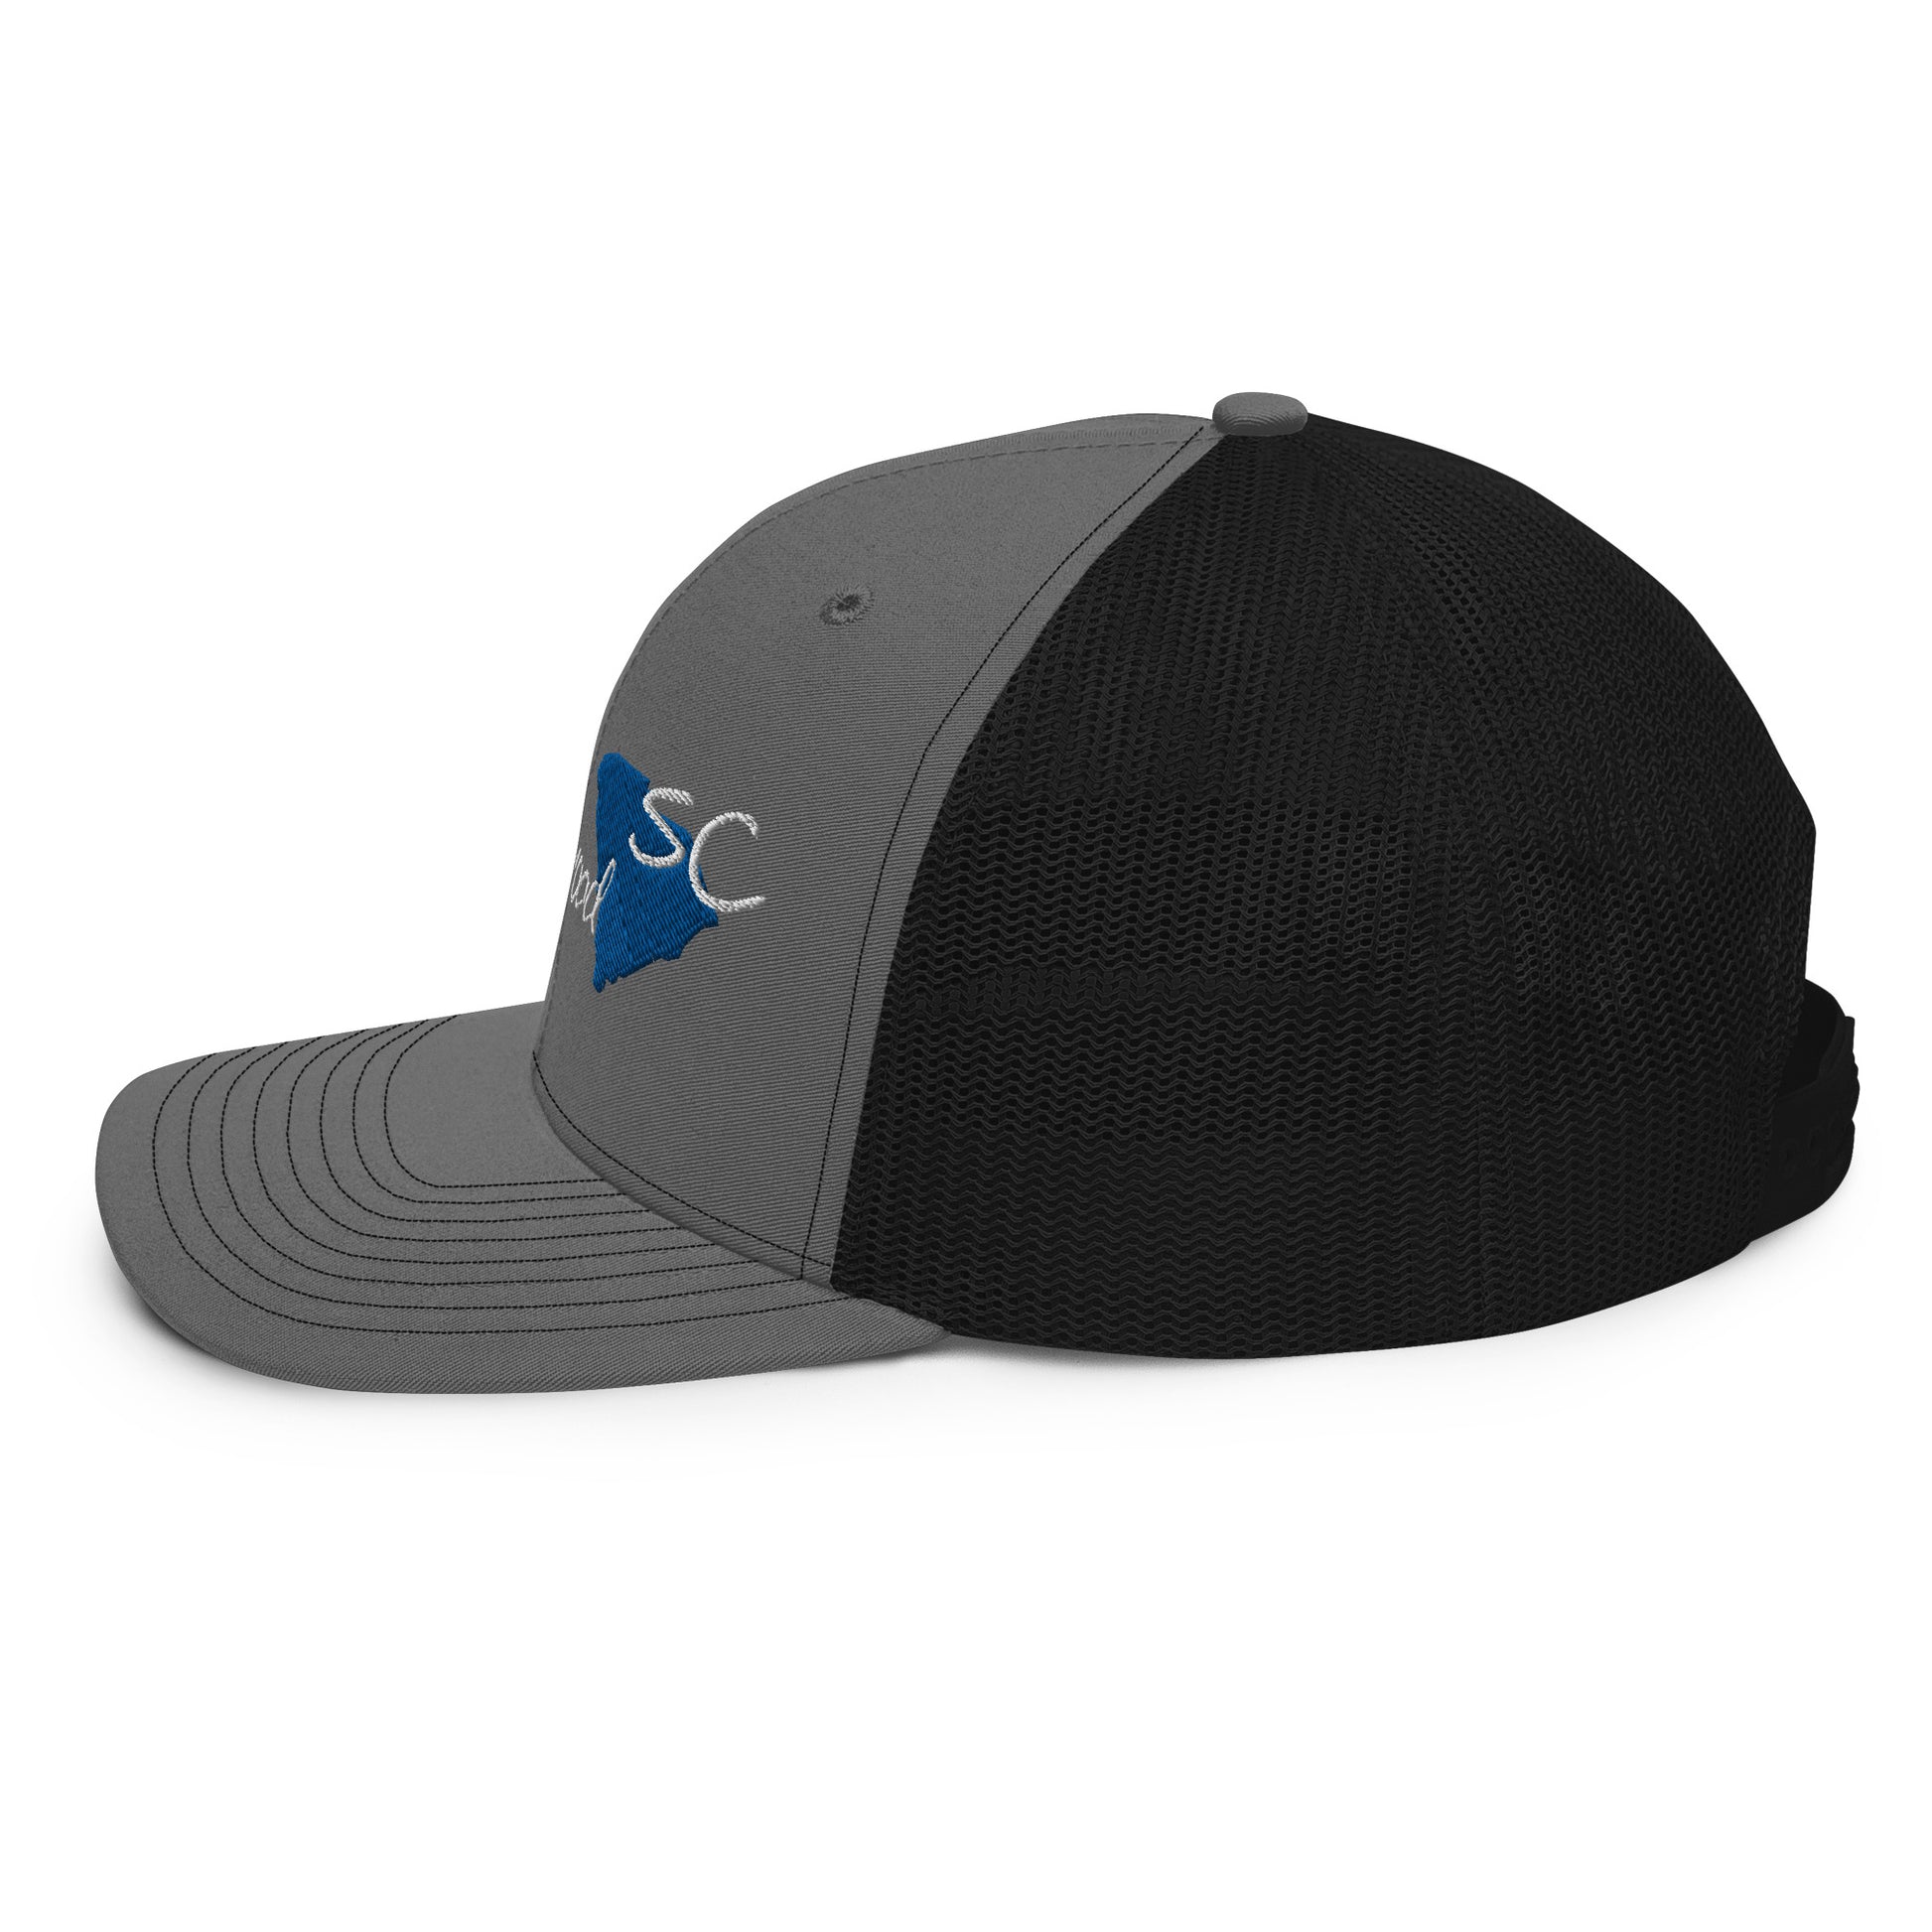 a black and grey hat with a blue and white logo